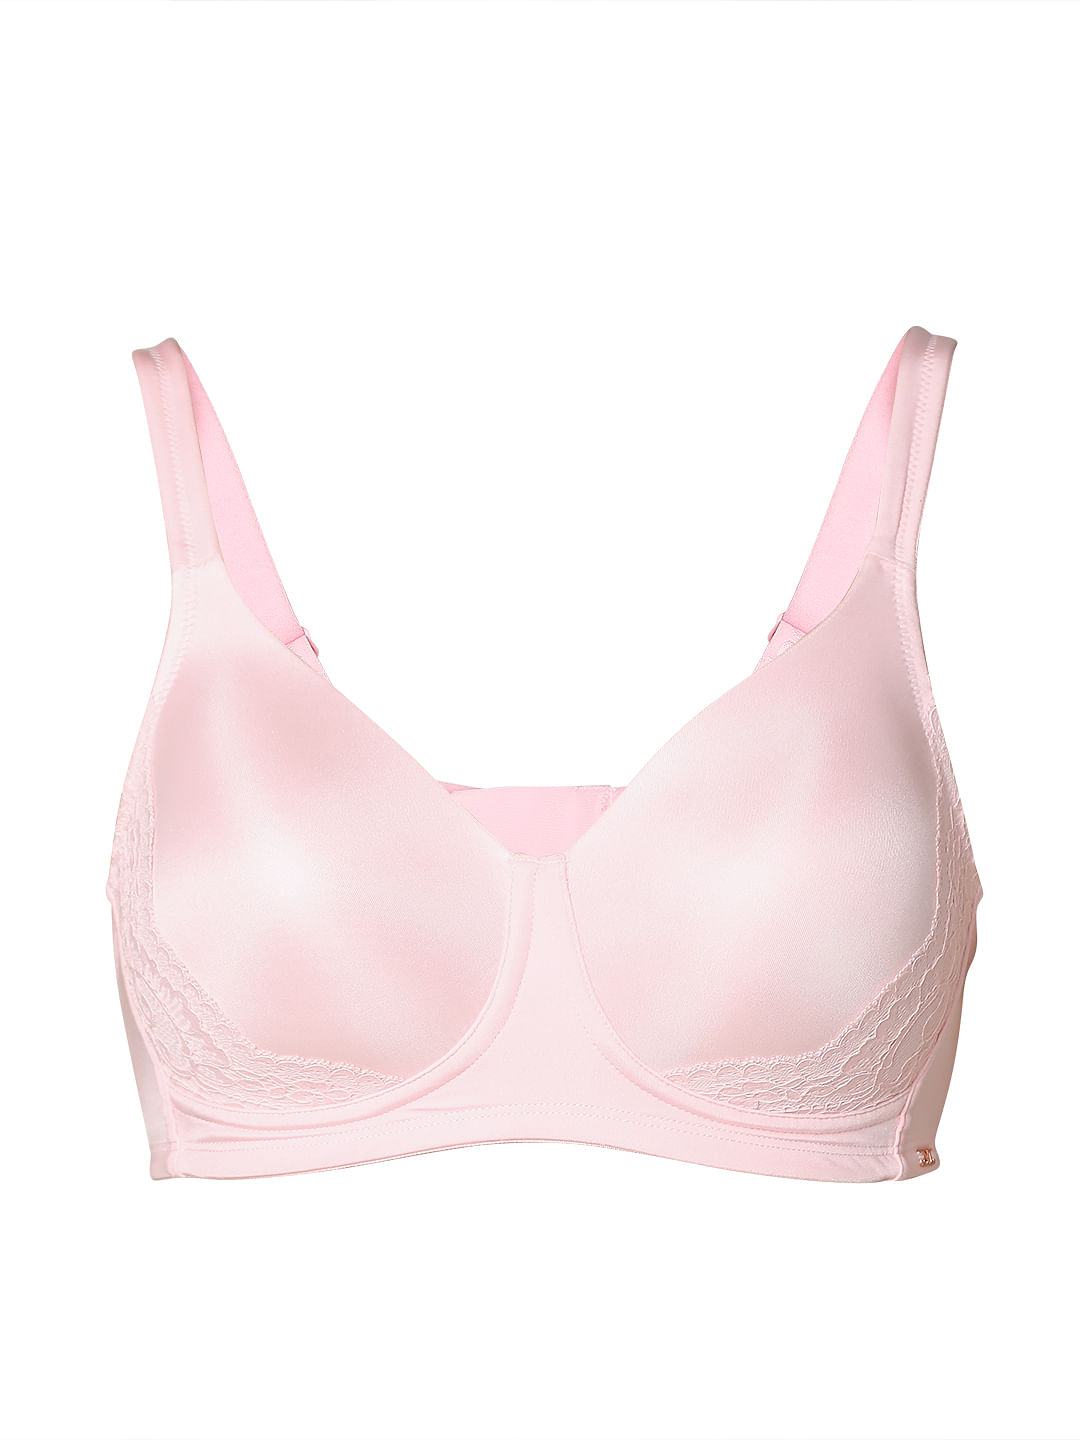 Mamia & Sofra IN-BR4342PLD-44D D Cup Full Coverage Bra - Size 44